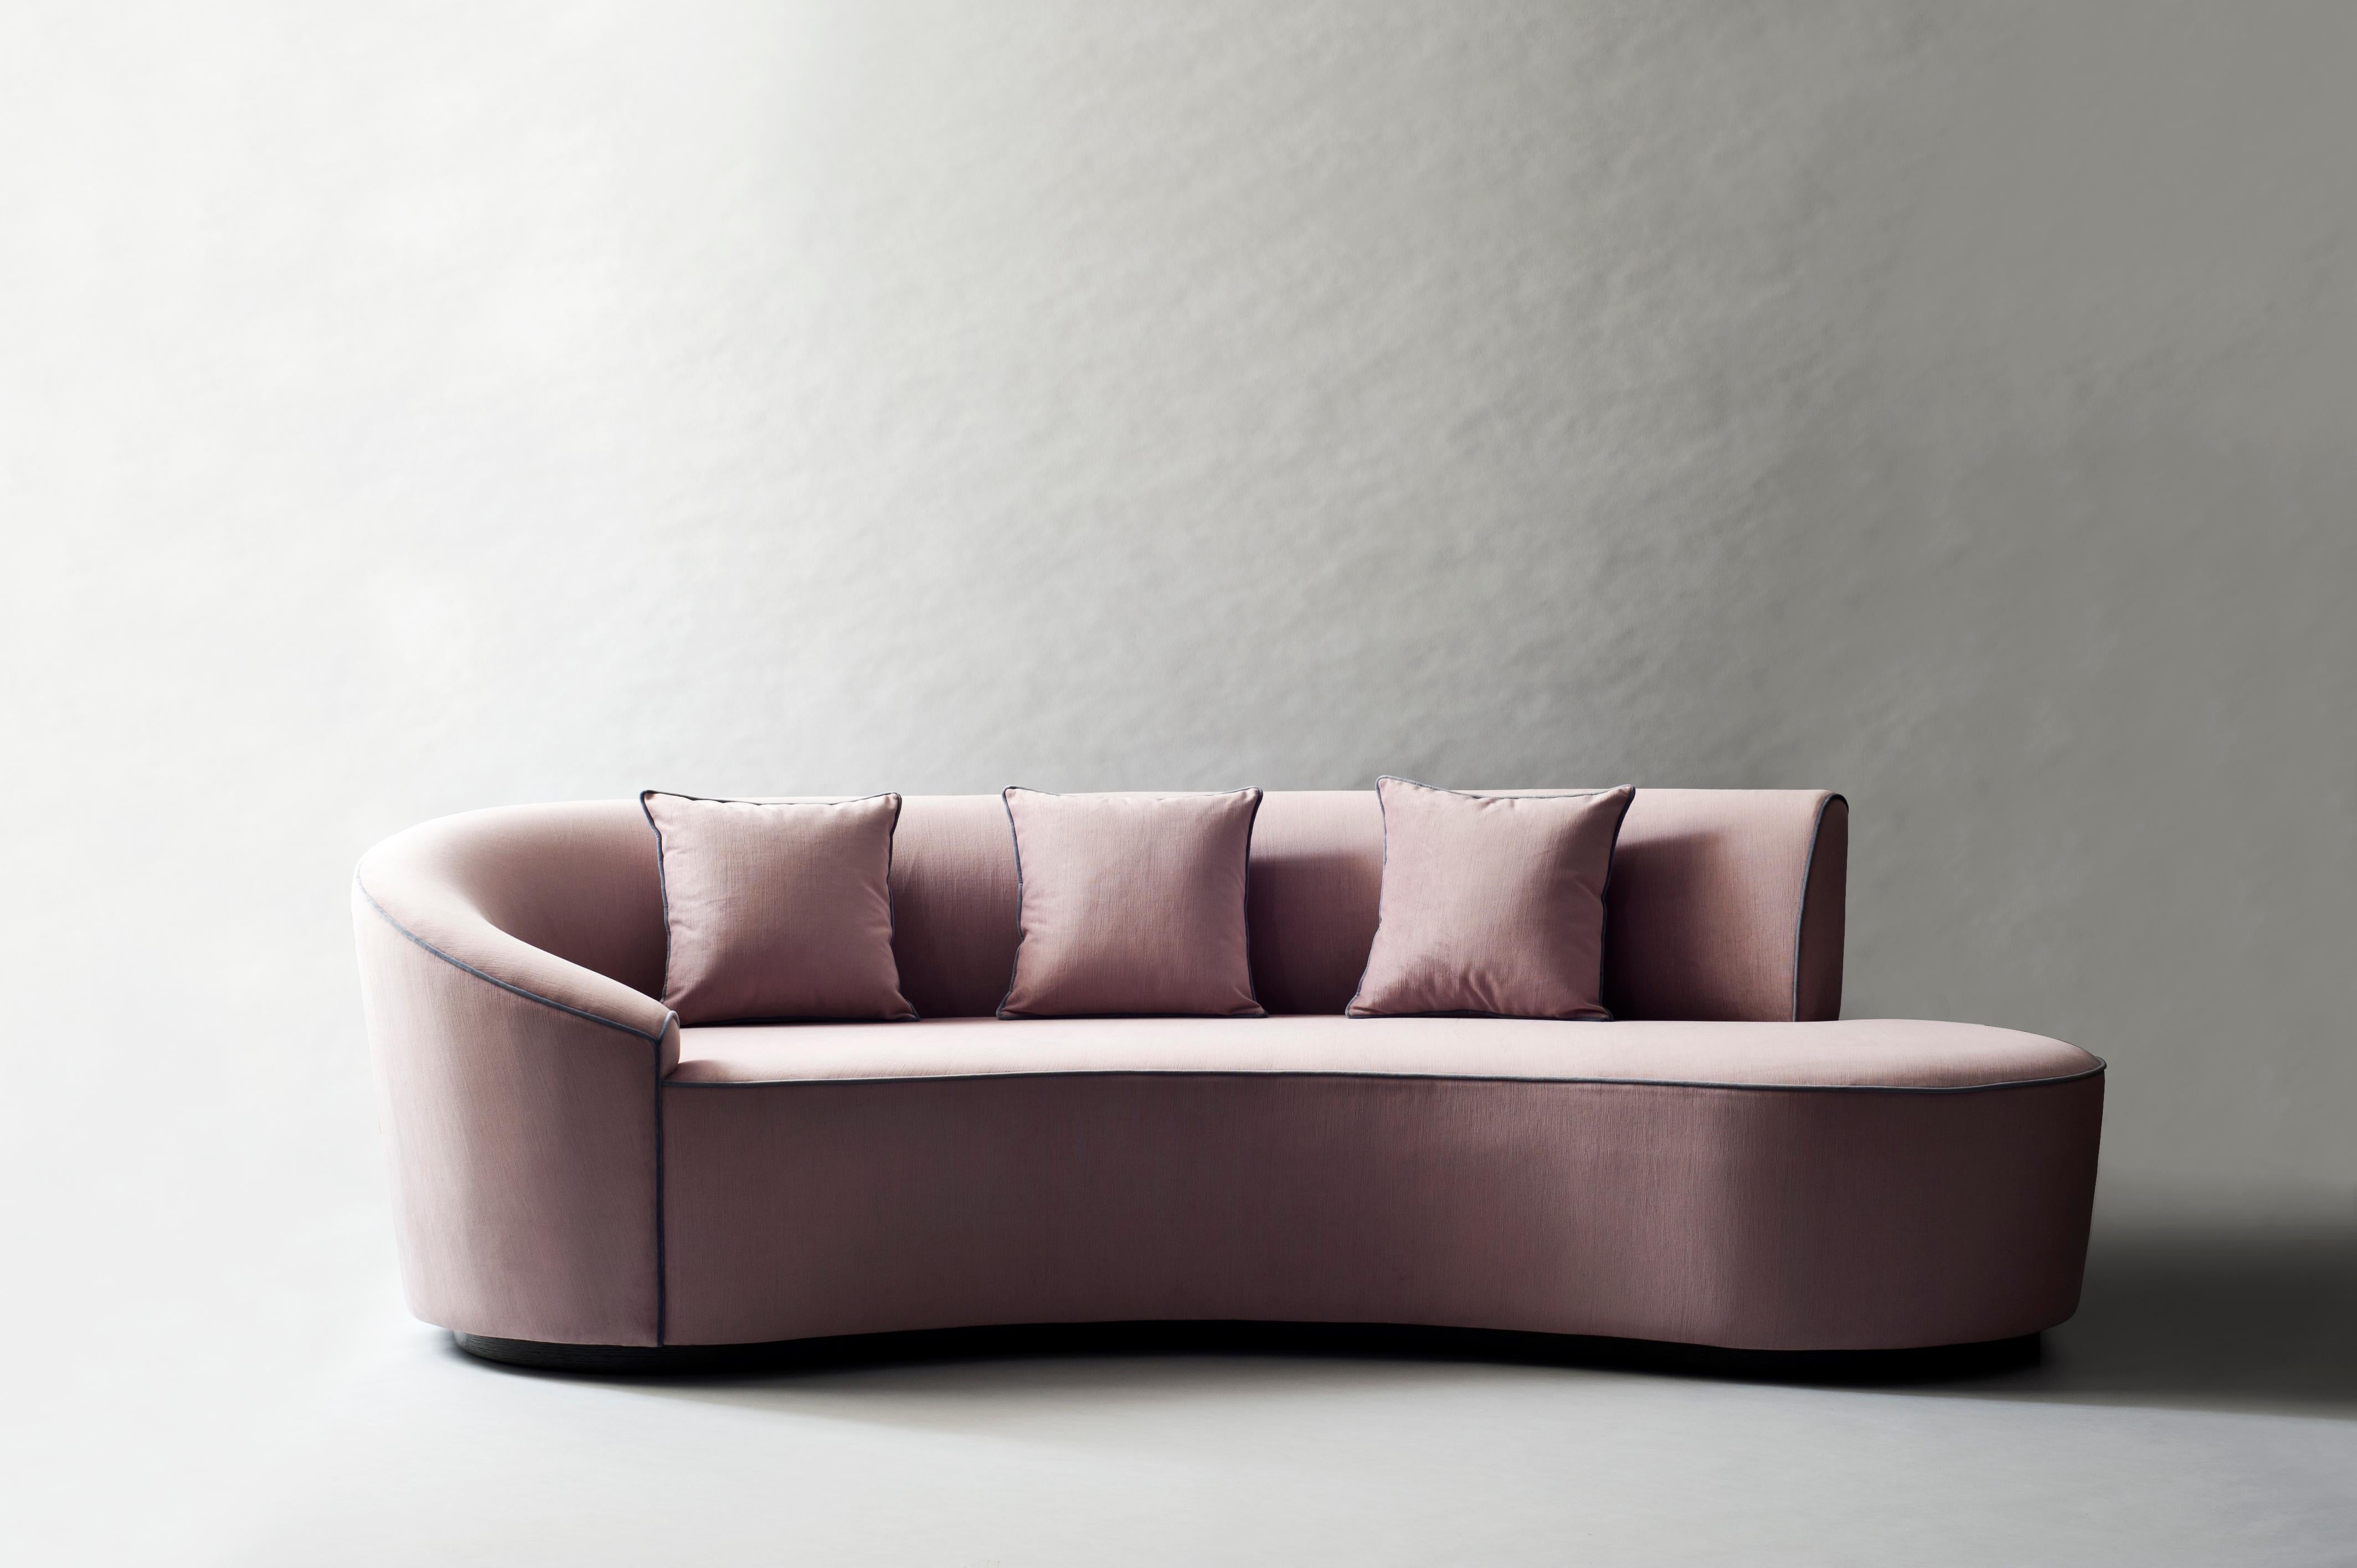 Taking inspiration from the lines of Vladimir Kagan's iconic serpentine sofa, the astra sofa by DeMuro Das features a curved back and arm and a long, sinuous seat. Solid hardwood frame with European webbing and multi-density foam make this a